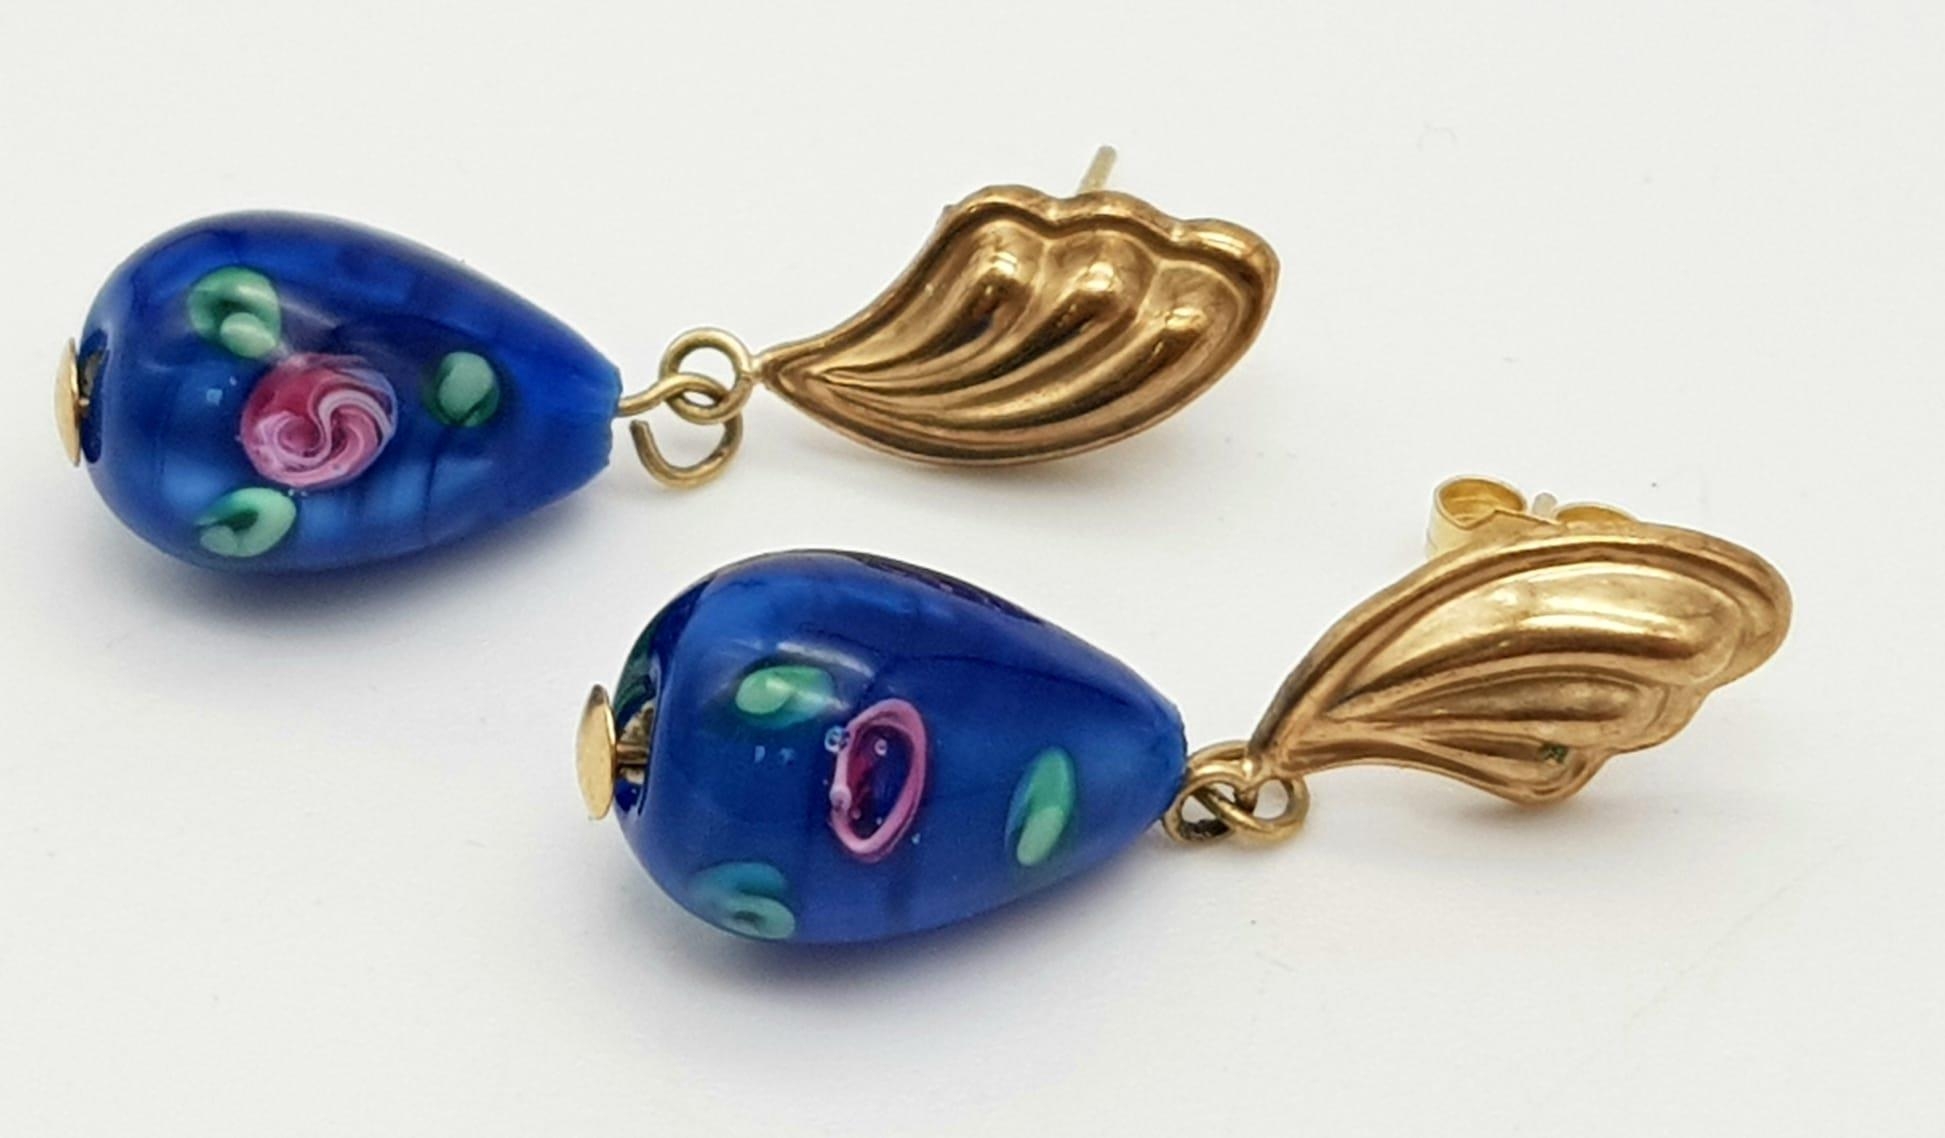 A Vintage Fancy Pair of 9K Yellow Gold and Blue Decorated Enamel Teardrop Earrings. 4.13g total - Image 3 of 3